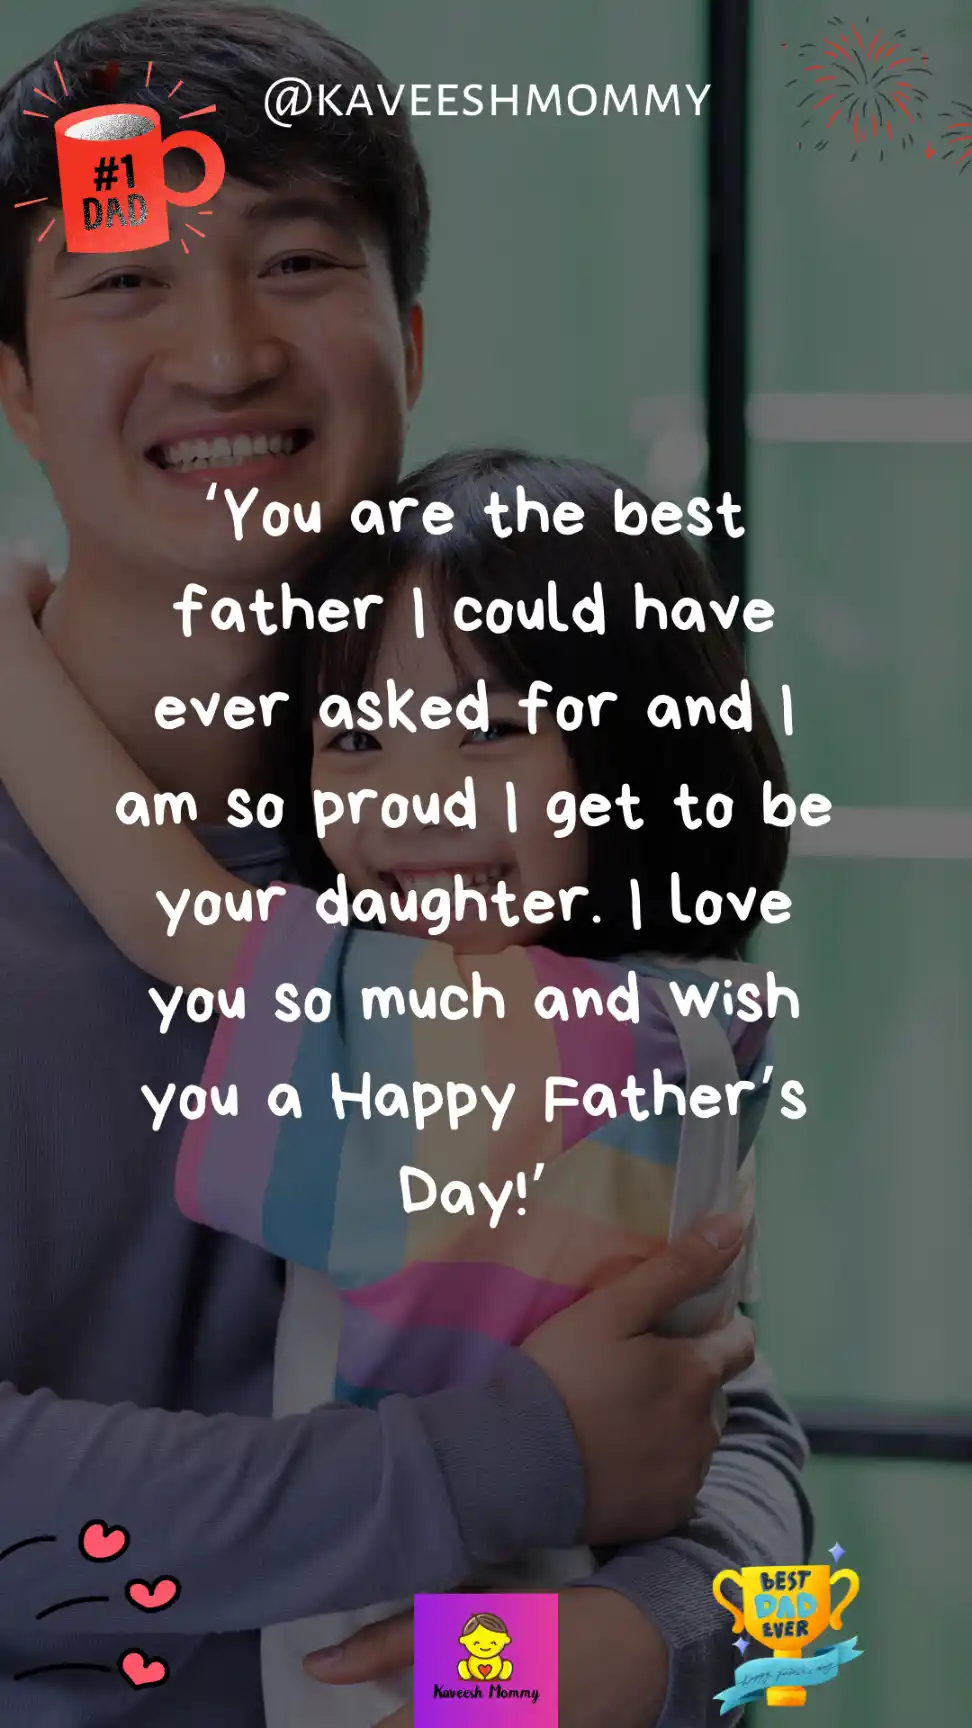 fathers day sayings from daughter-‘You are the best father I could have ever asked for and I am so proud I get to be your daughter. I love you so much and wish you a Happy Father’s Day!’